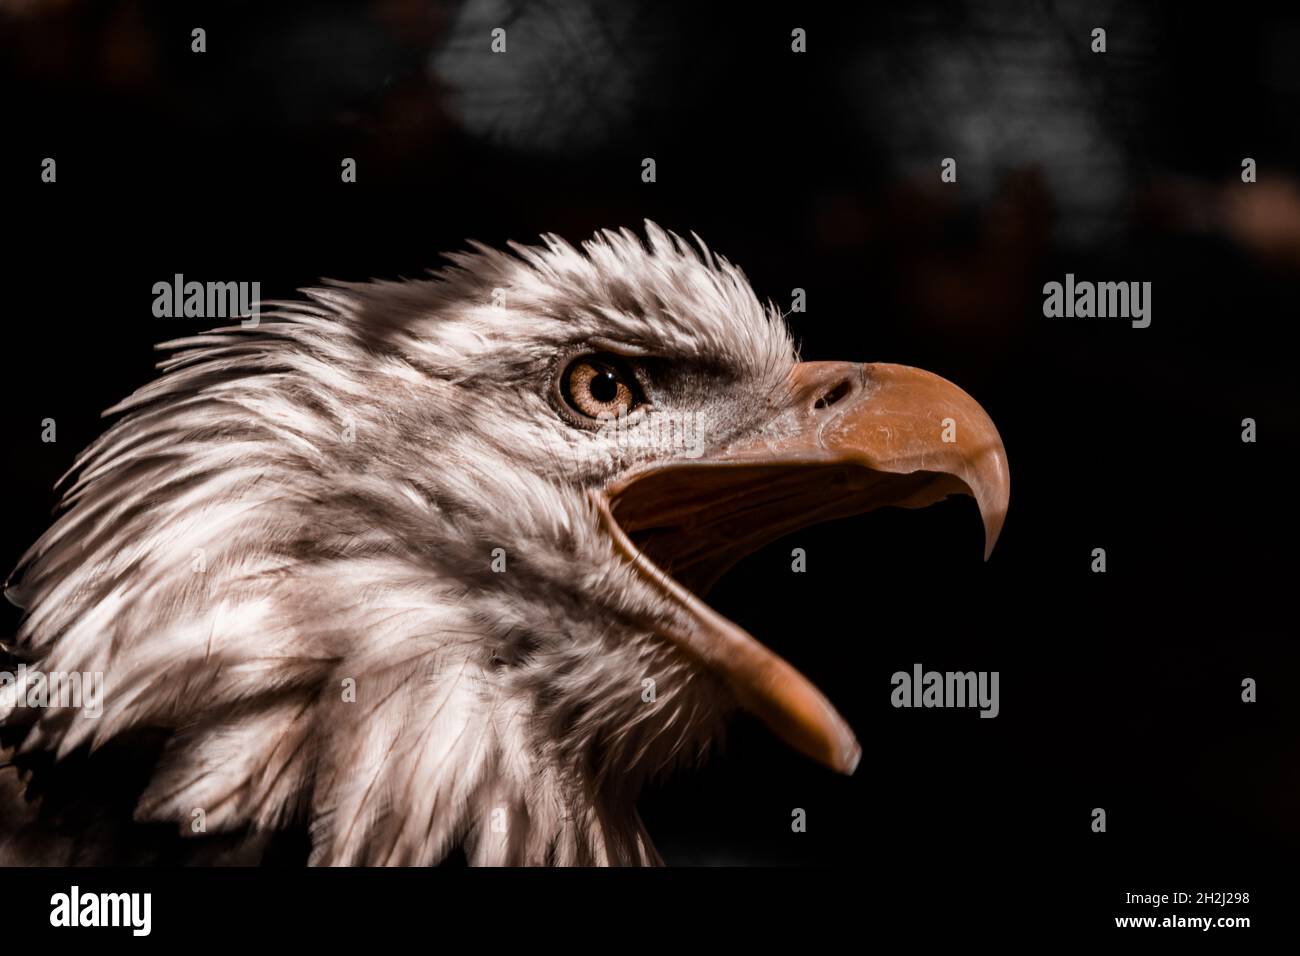 Aggressive, angry eagle with an open mouth on a dark background. Gloomy shades. Stock Photo